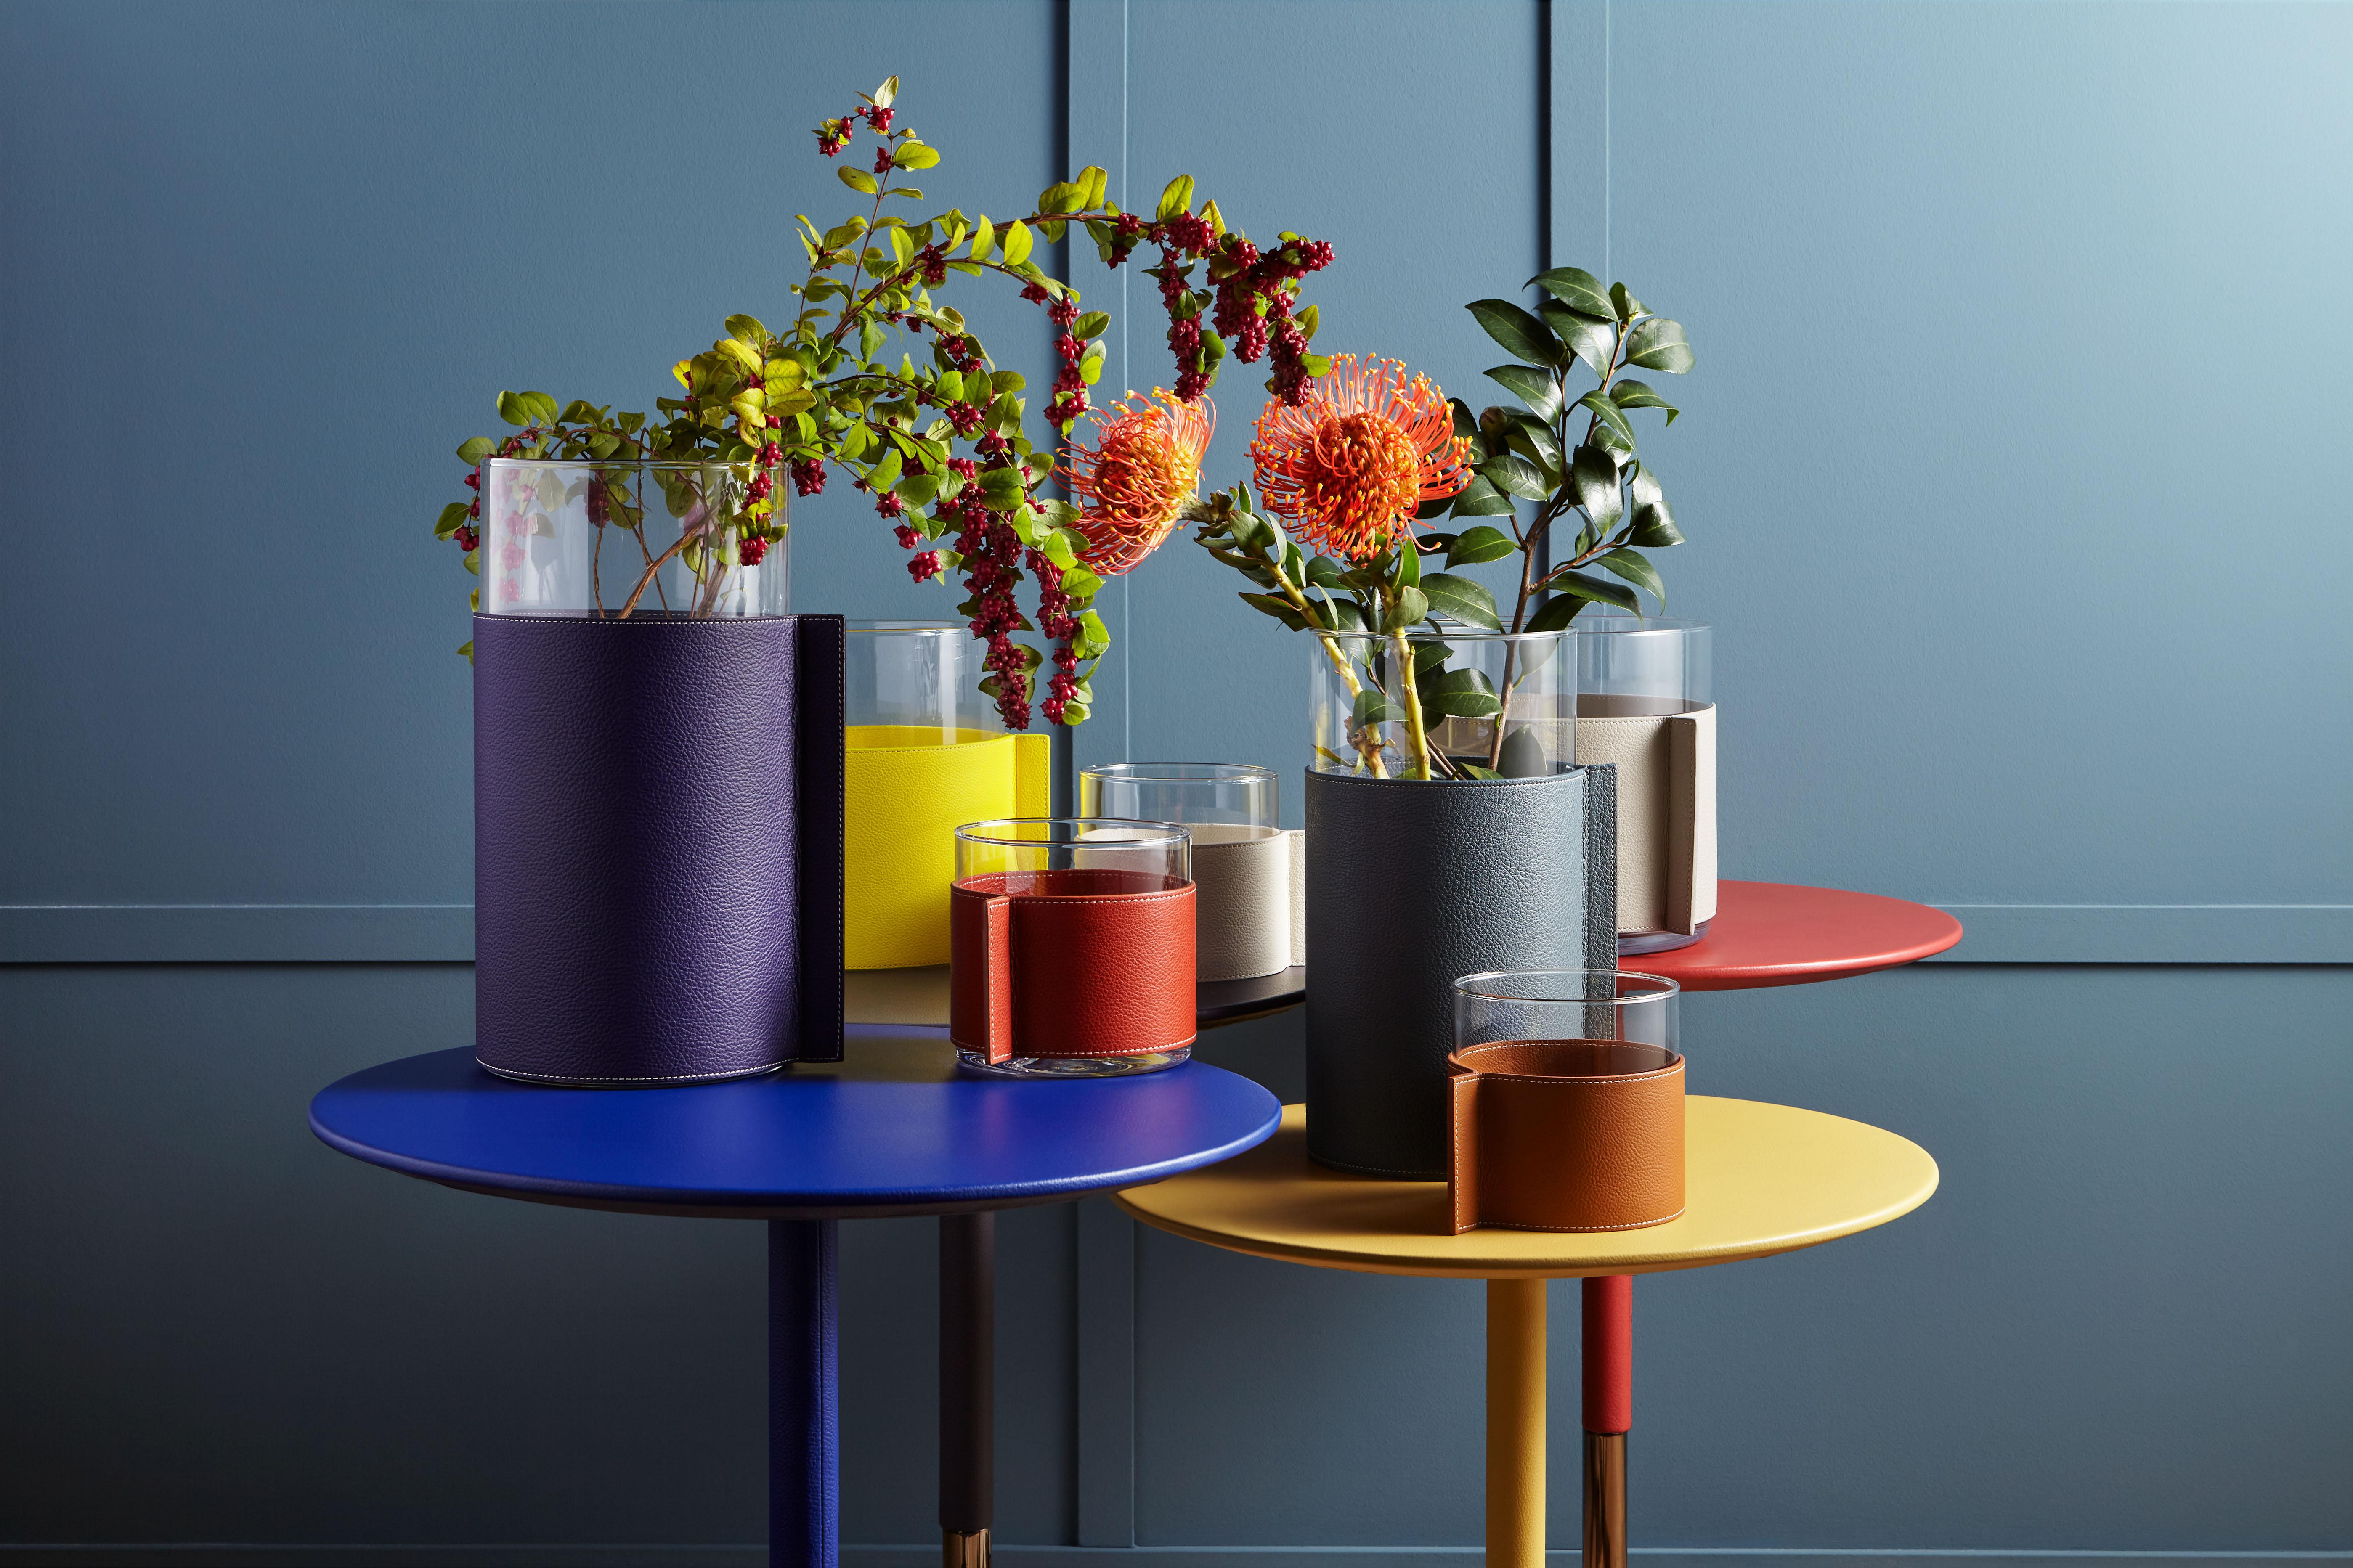 Leather pot is a transparent glass and soft leather for a family of open vases that can be mixed and matched or used on their own. The Leather Pot vases collection, designed by Poltrona Frau, consists of three simple transparent glass cylinders in